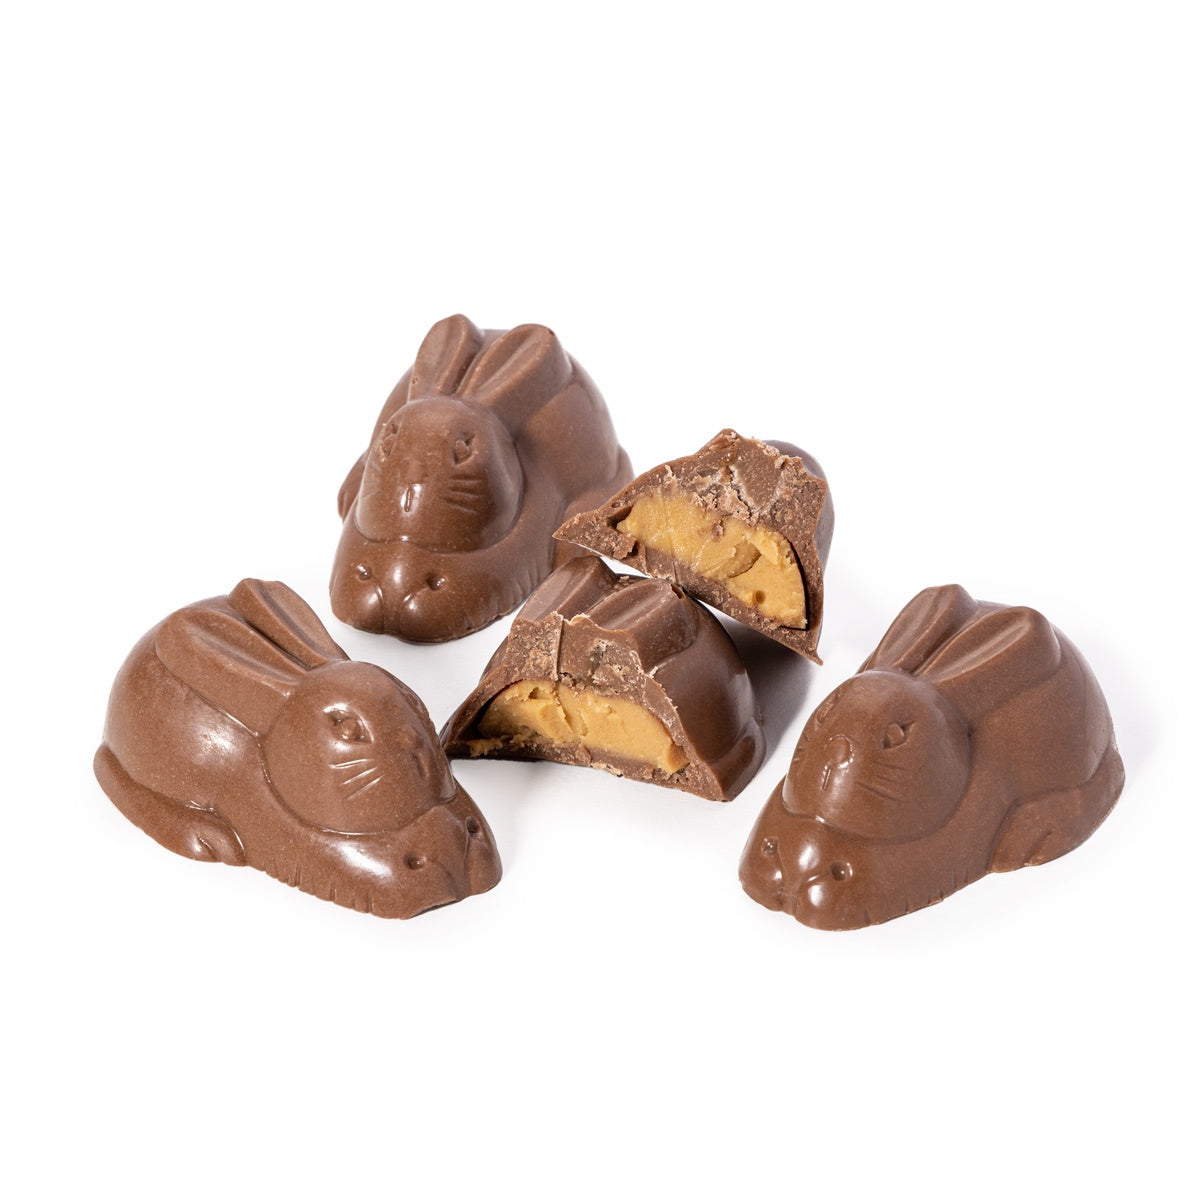 Charlotte Piper Peanut Butter Filled Bunnies 4 pack